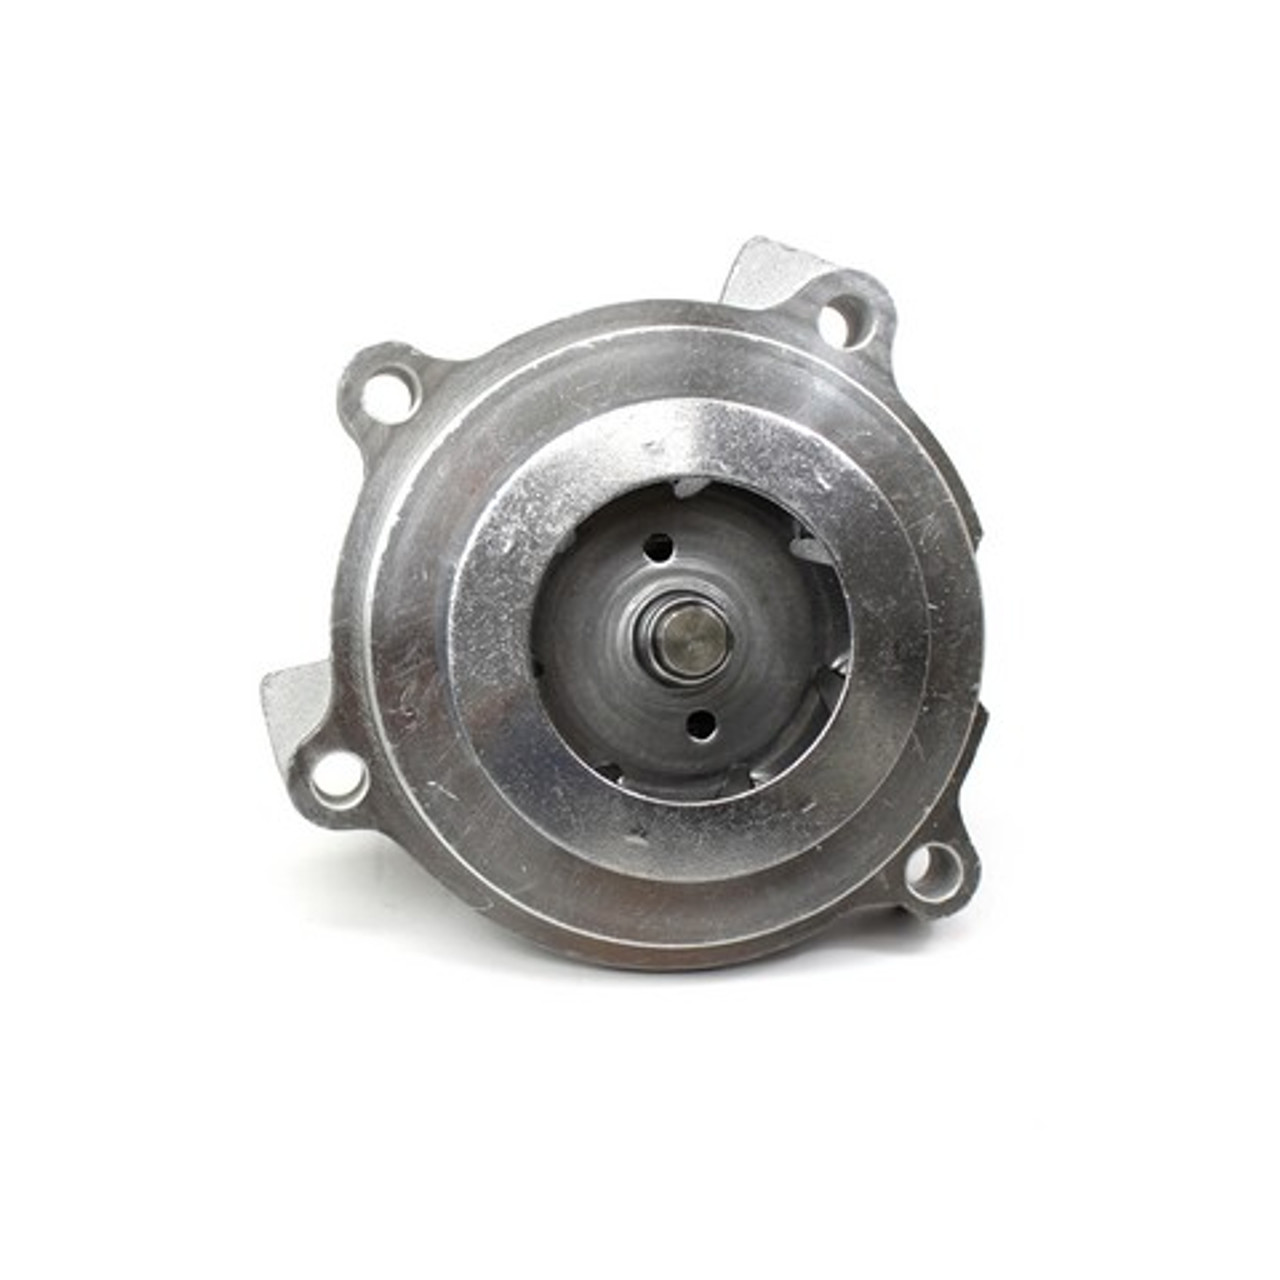 Water Pump 4.6L 2002 Ford Crown Victoria - WP4136.5